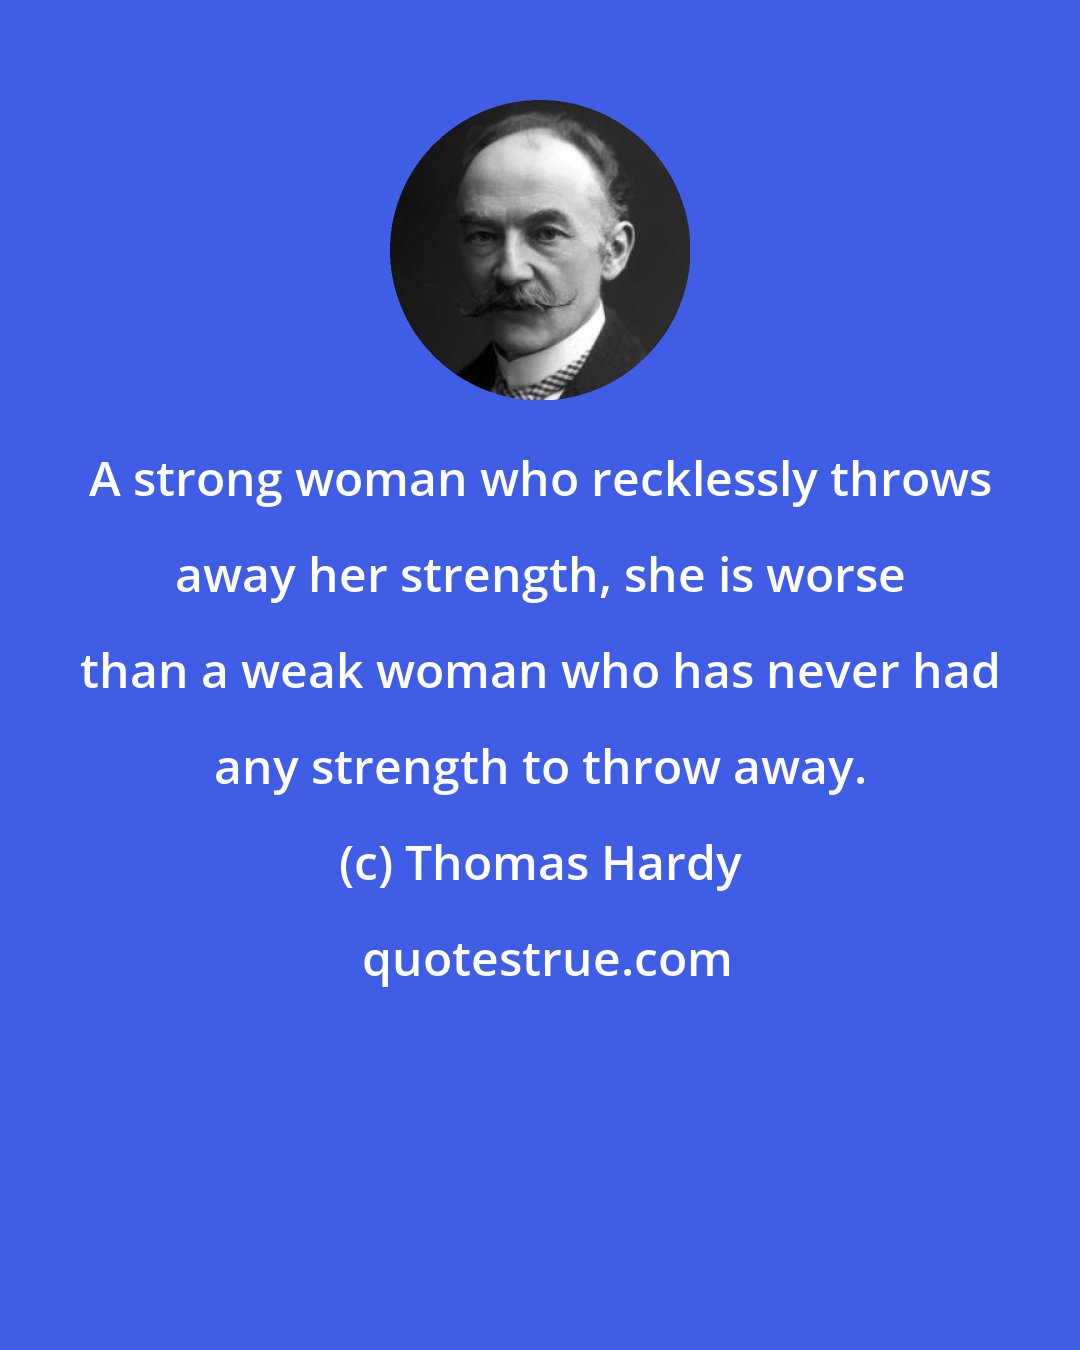 Thomas Hardy: A strong woman who recklessly throws away her strength, she is worse than a weak woman who has never had any strength to throw away.